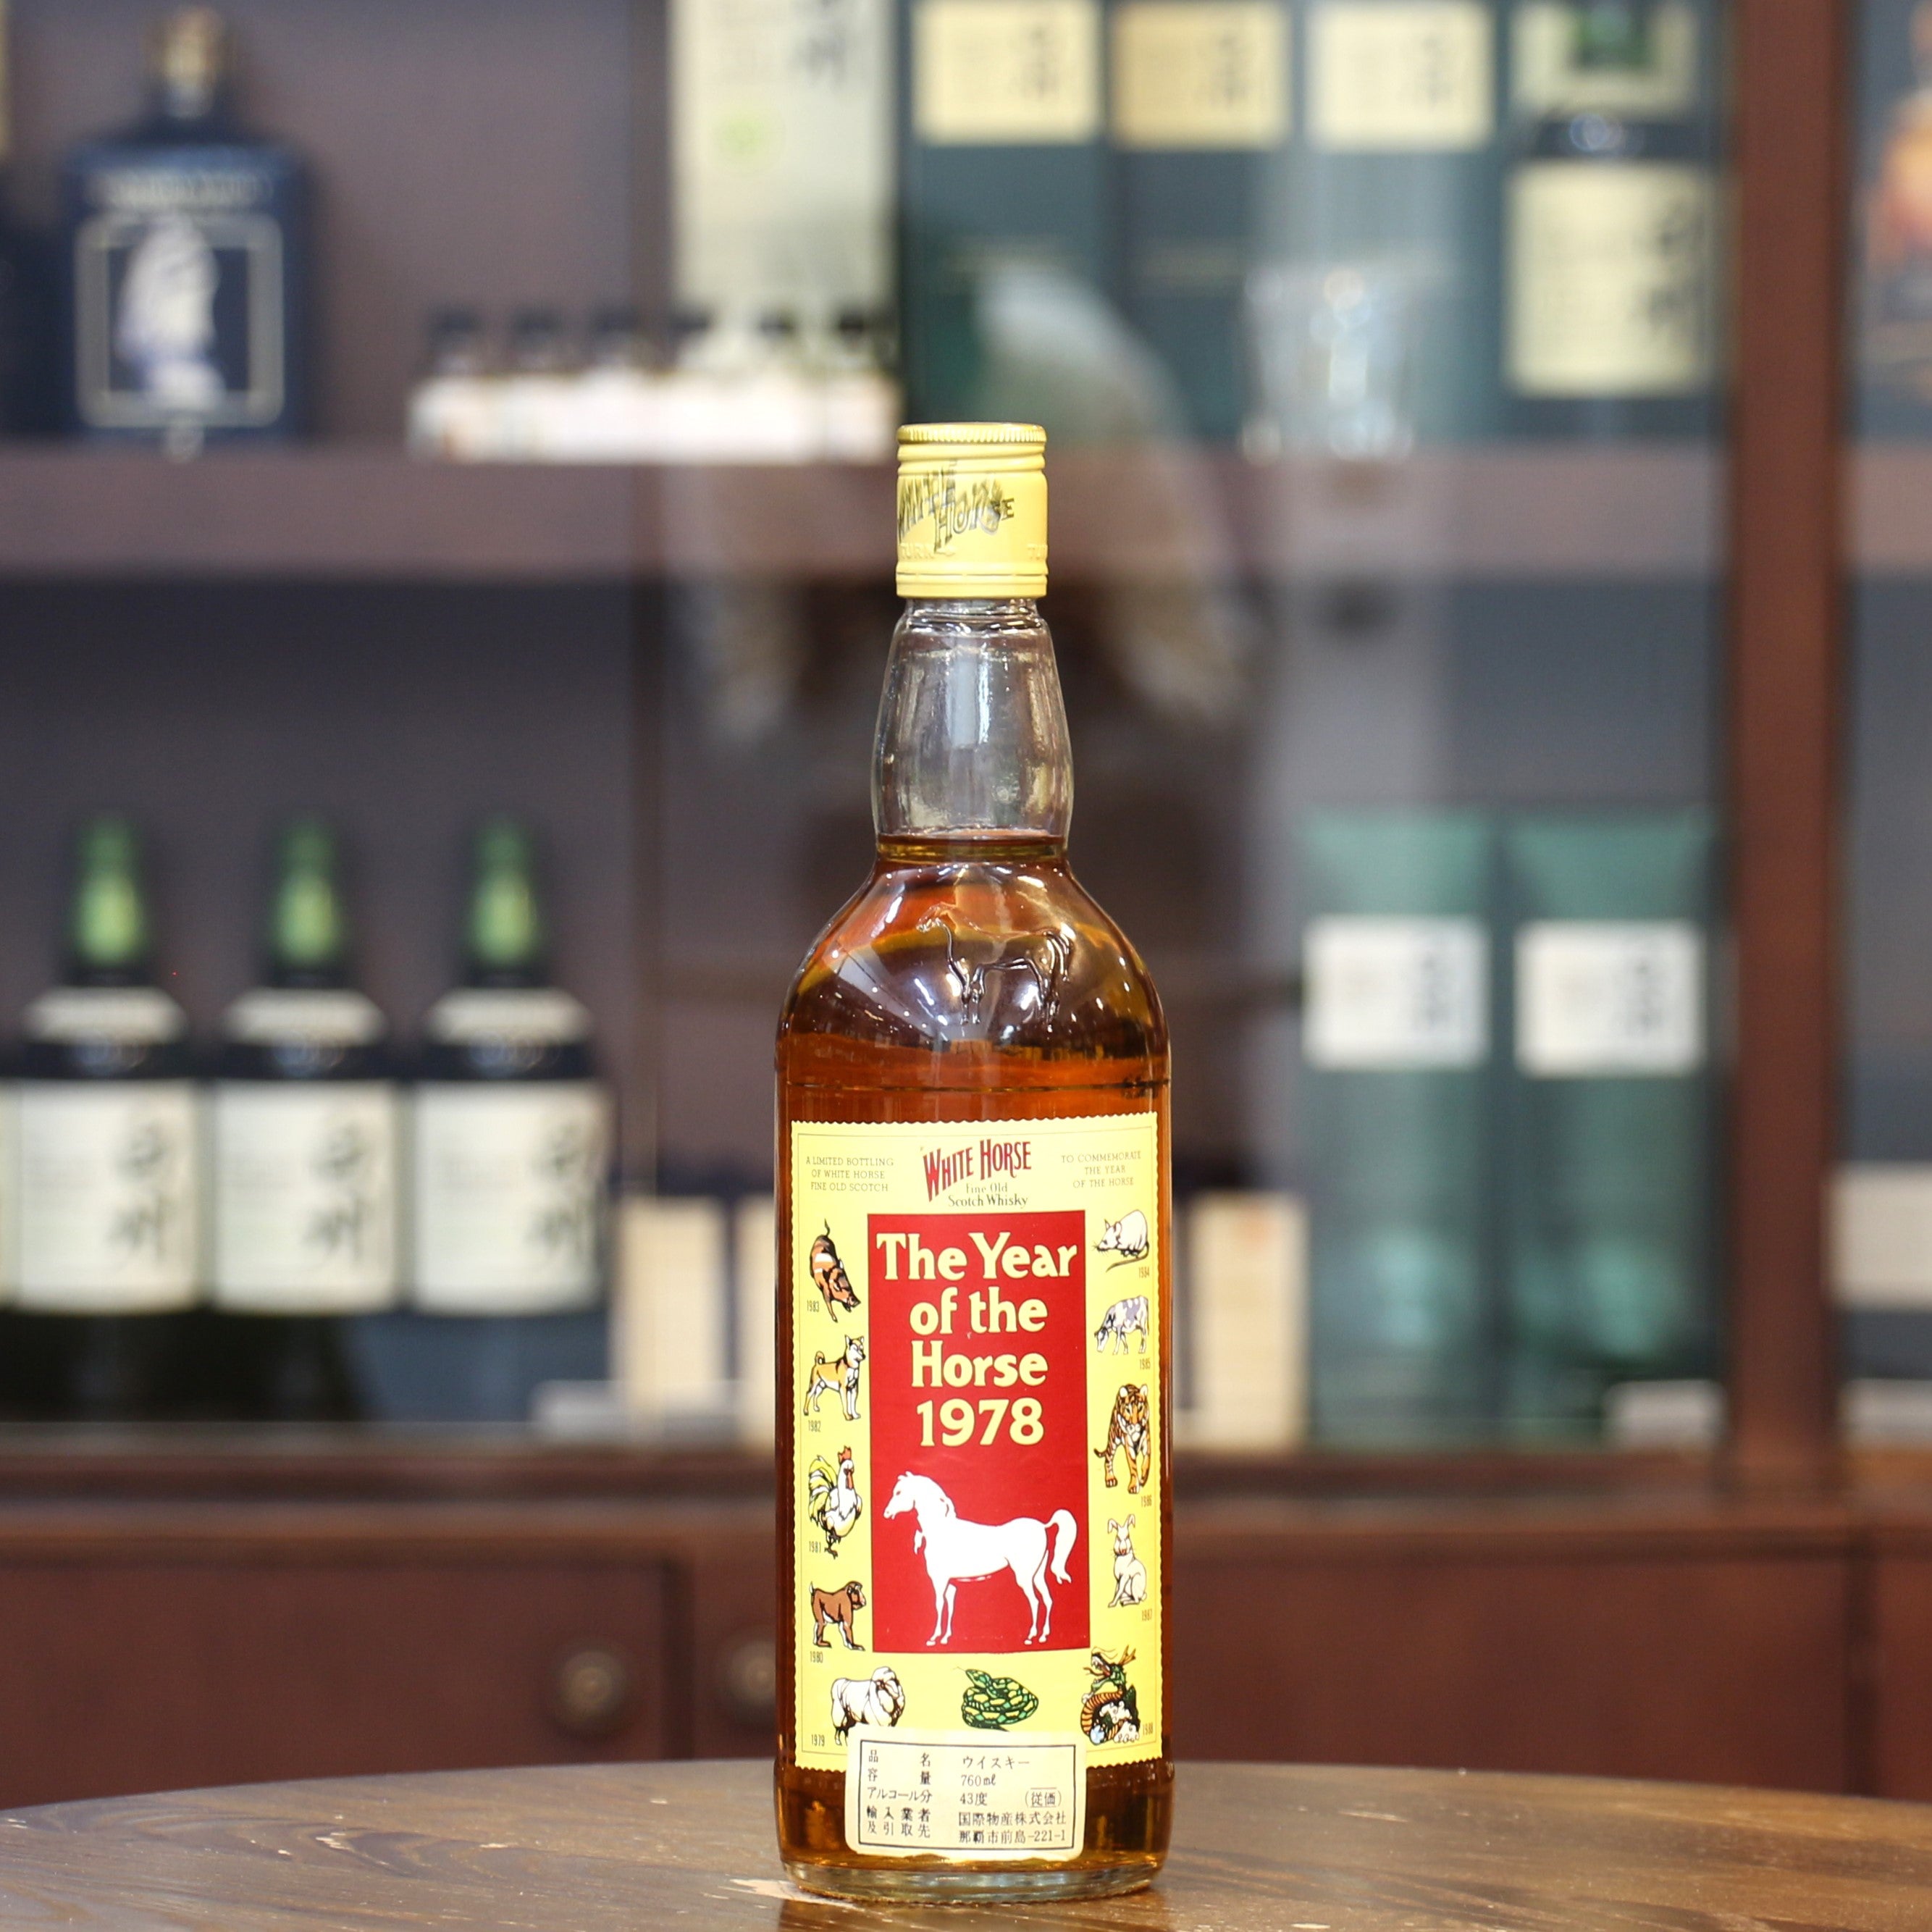 White Horse 1978 "The Year of the Horse" Fine Old Scotch Whisky